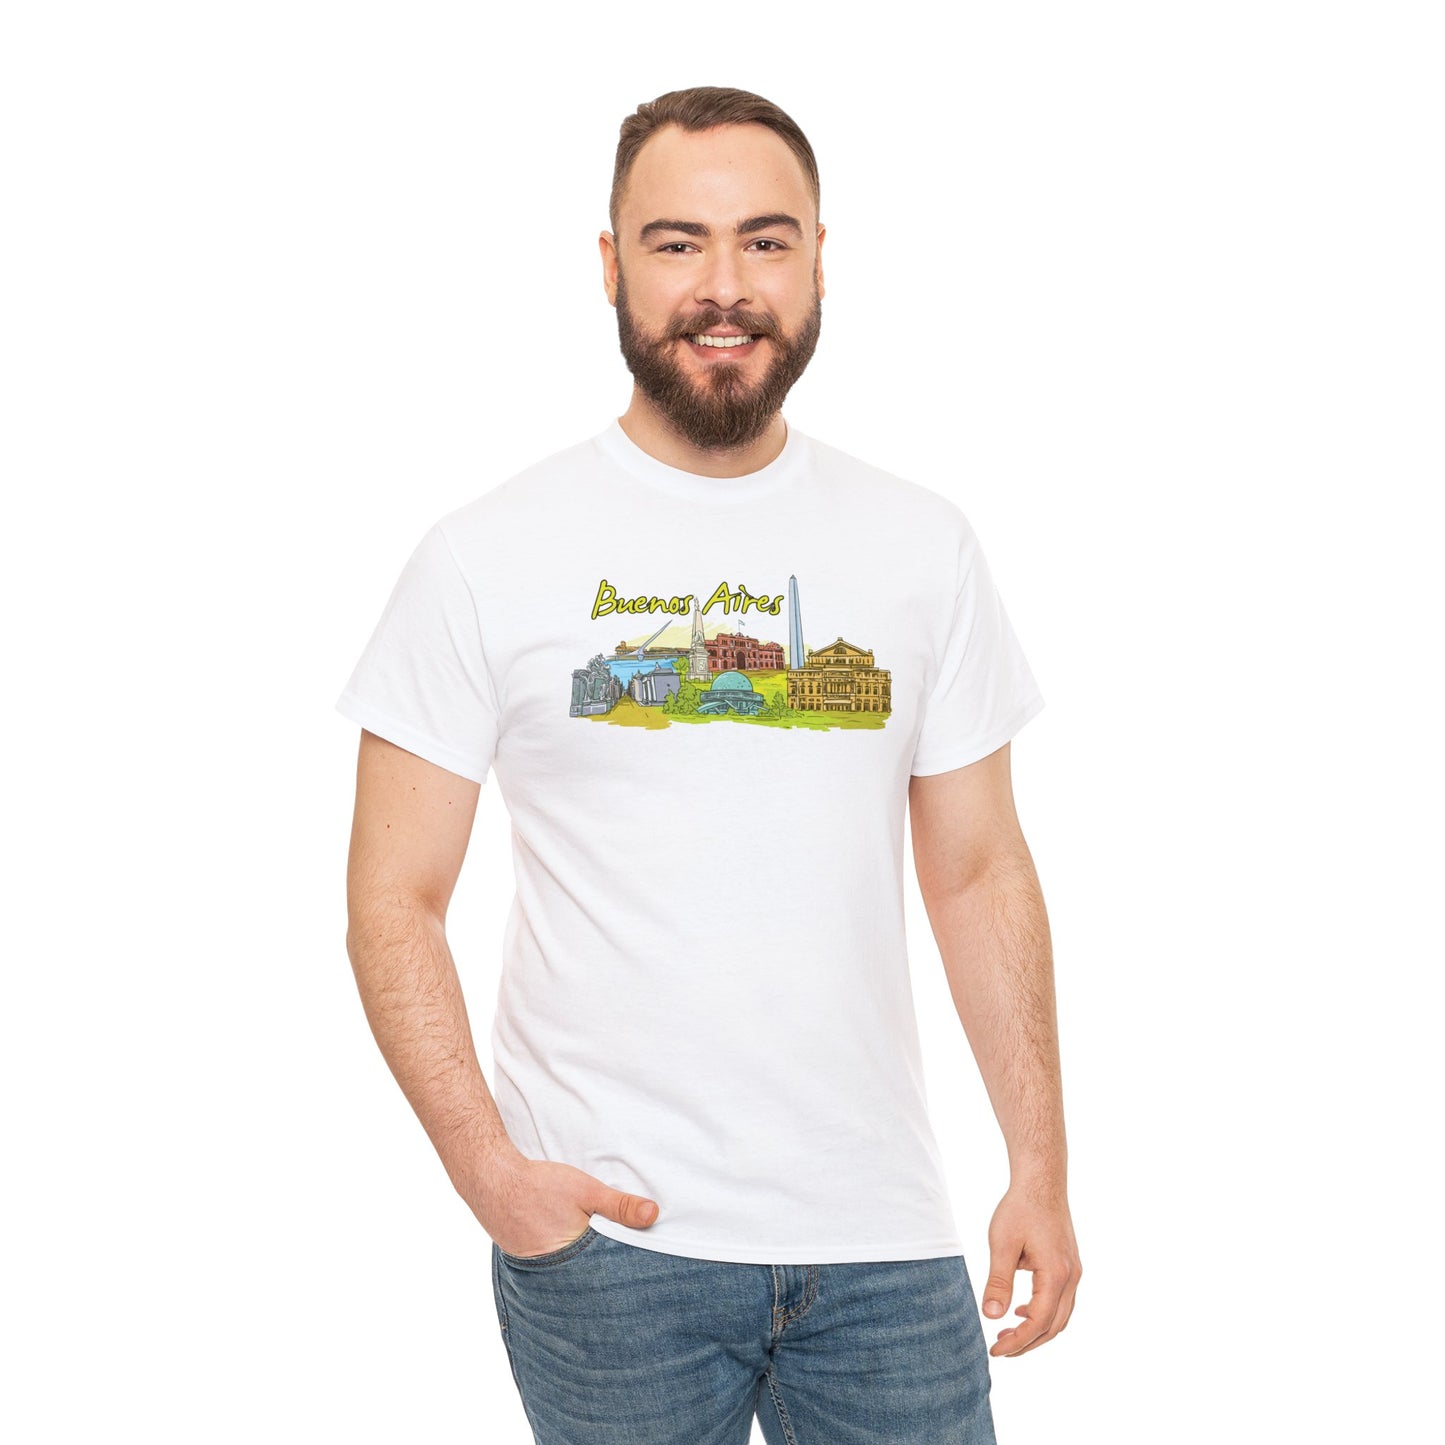 Buenos Aires Vibes: Explore the City in Style with Our Trendy T-Shirt!